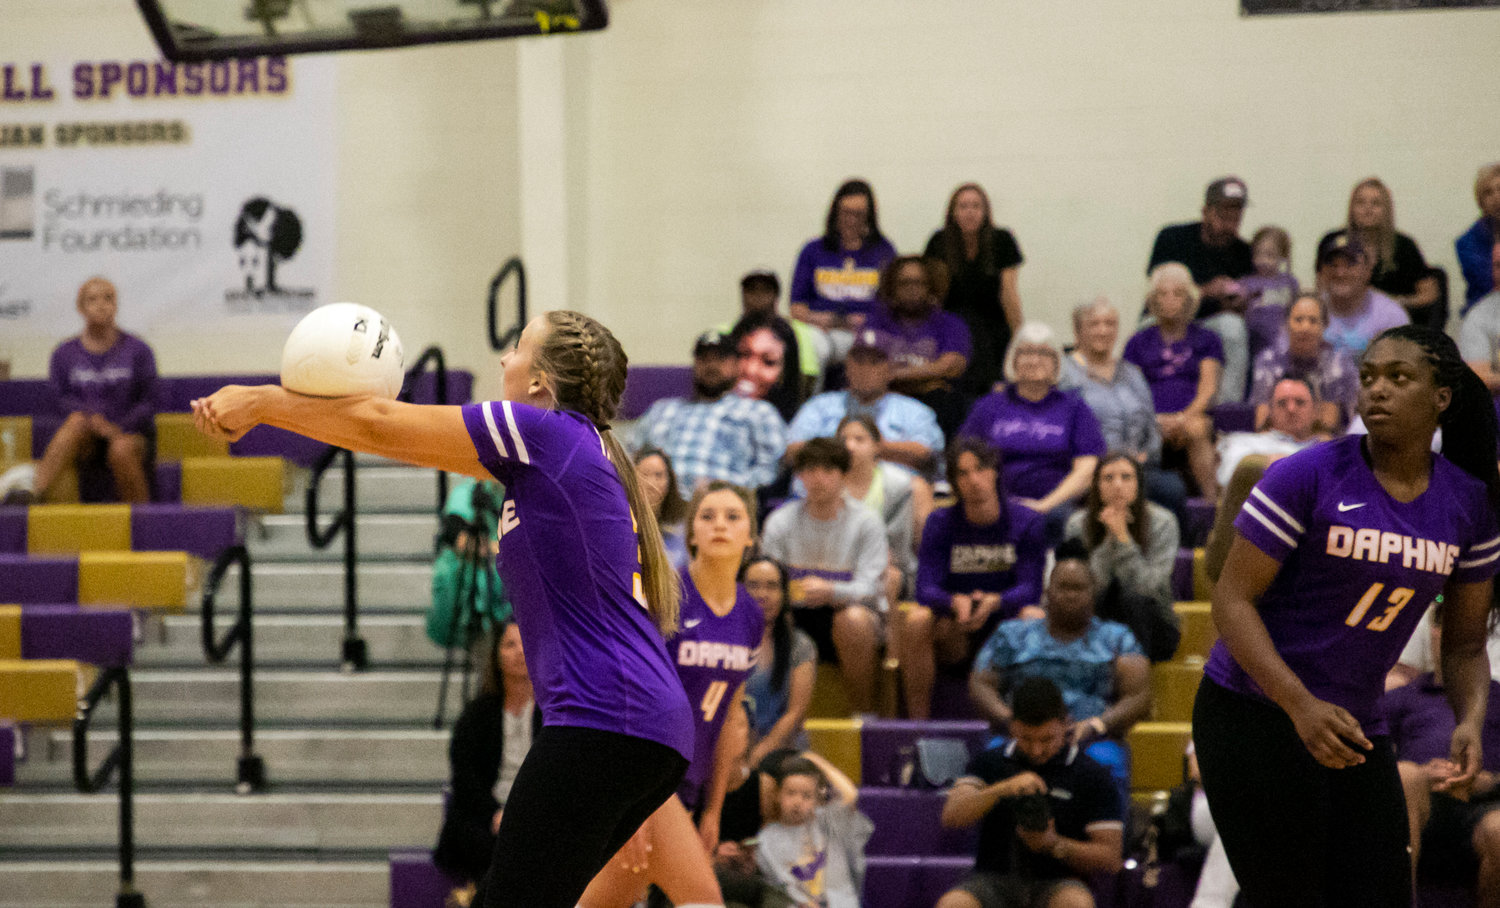 Daphne junior setter Lucy McCoy bumps a pass during the Trojans’ area match against the McGill-Toolen Yellow Jackets Tuesday, Sept. 20, at home. McCoy surpassed 1,000 assists as a Daphne Trojan this season to help her team surpass last year’s win total and climb to No. 37 in MaxPreps rankings.